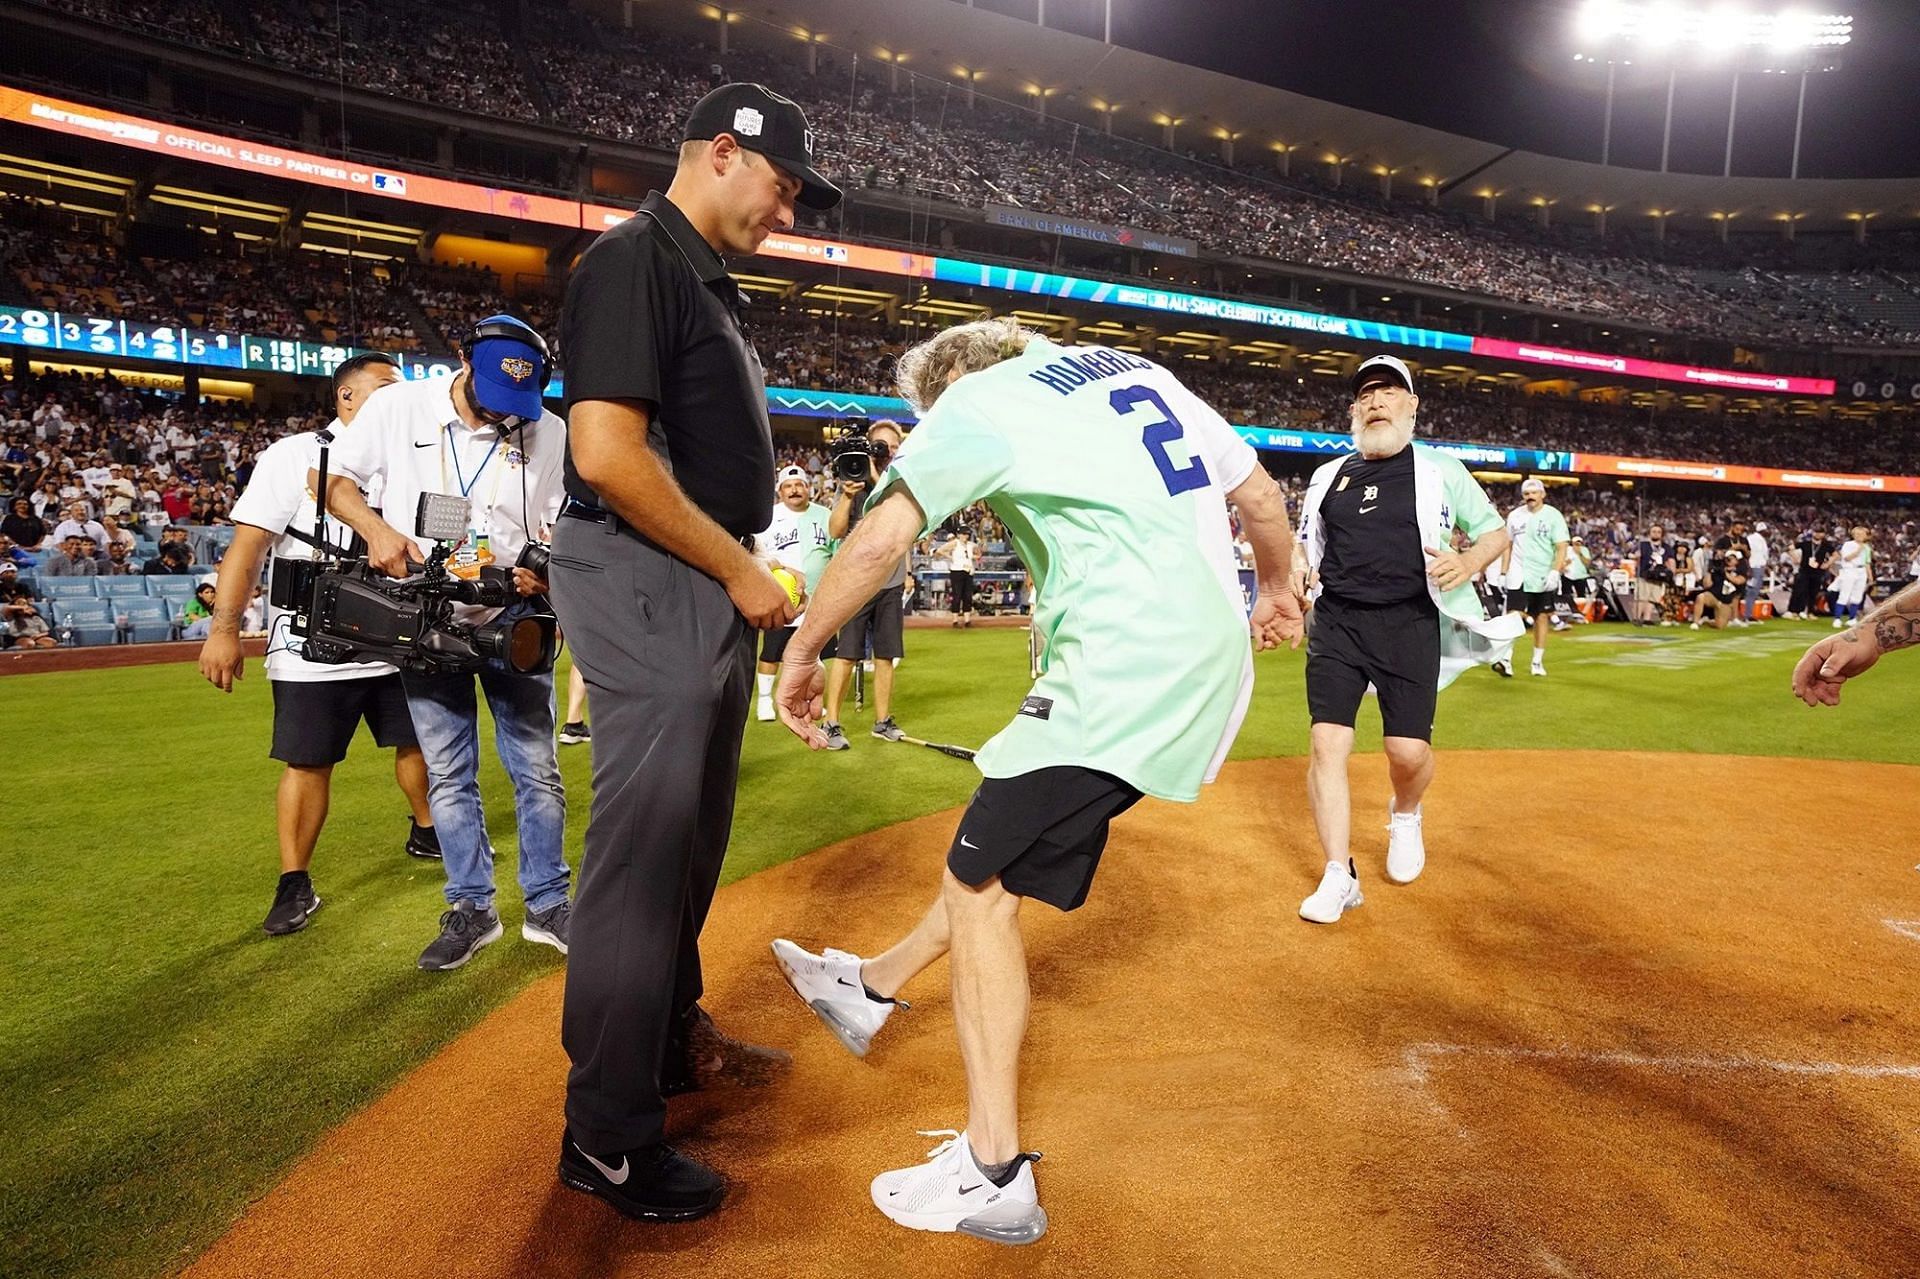 Bryan Cranston Hit By Ball, Ejected From All-Star Celebrity Softball Game